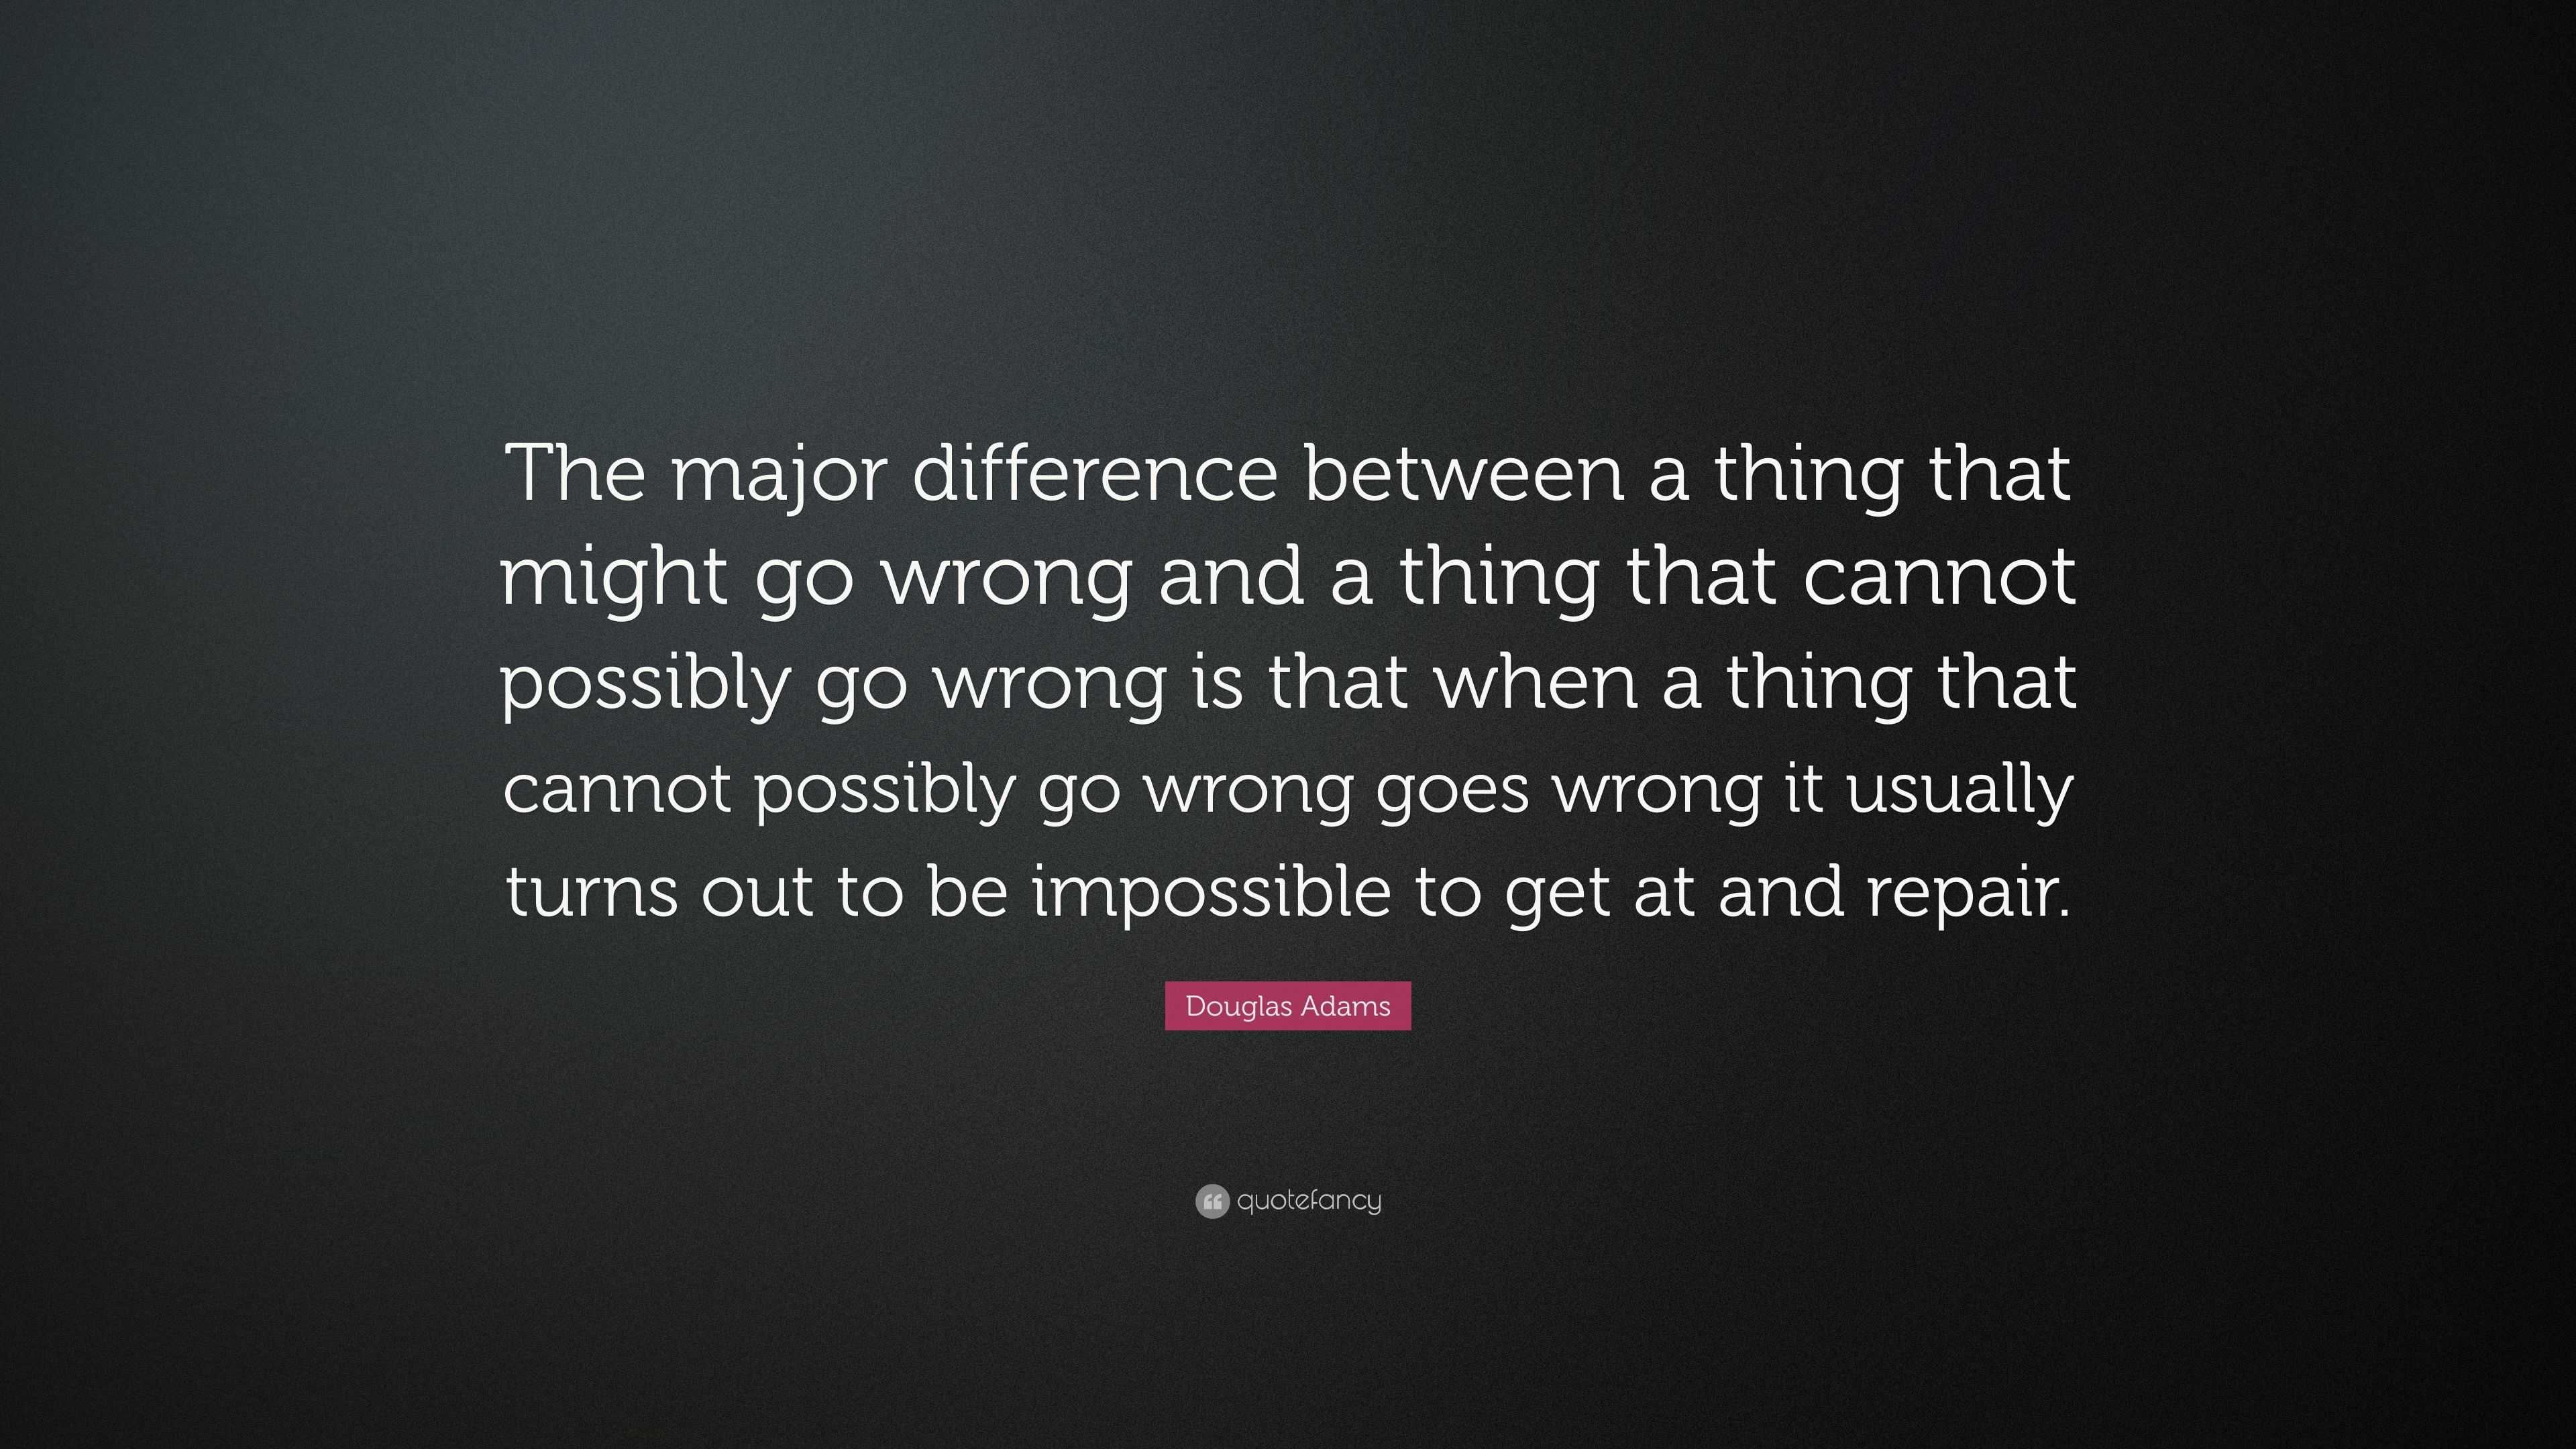 Douglas Adams Quote The Major Difference Between A Thing That Might Go Wrong And A Thing That Cannot Possibly Go Wrong Is That When A Thing